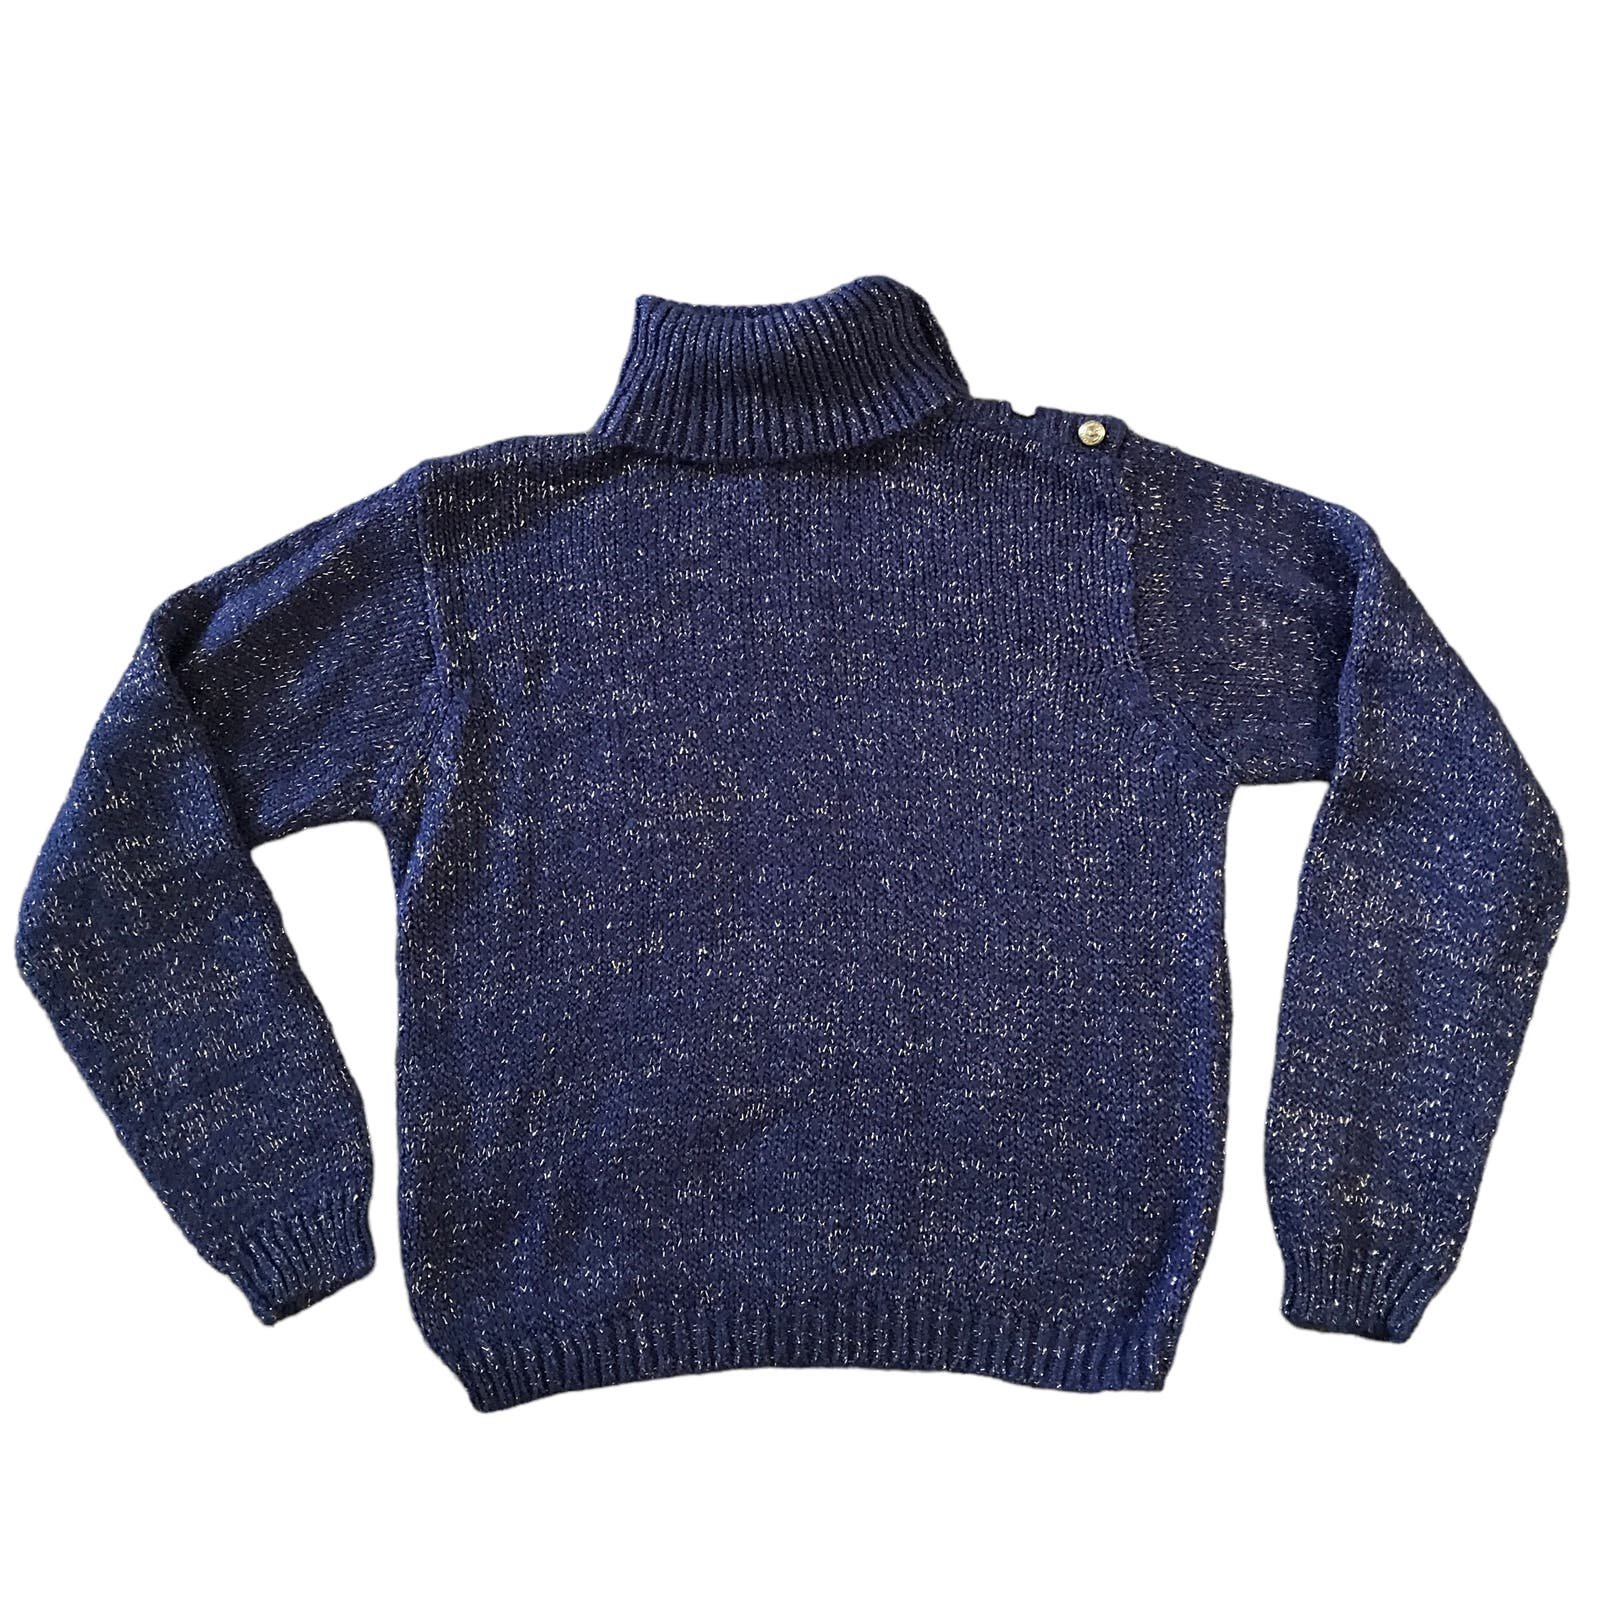 large discount Vintage Toi Blue Turtleneck Knit Sweater With Gold Threads SZ M jiHiGIWgV High Quaity